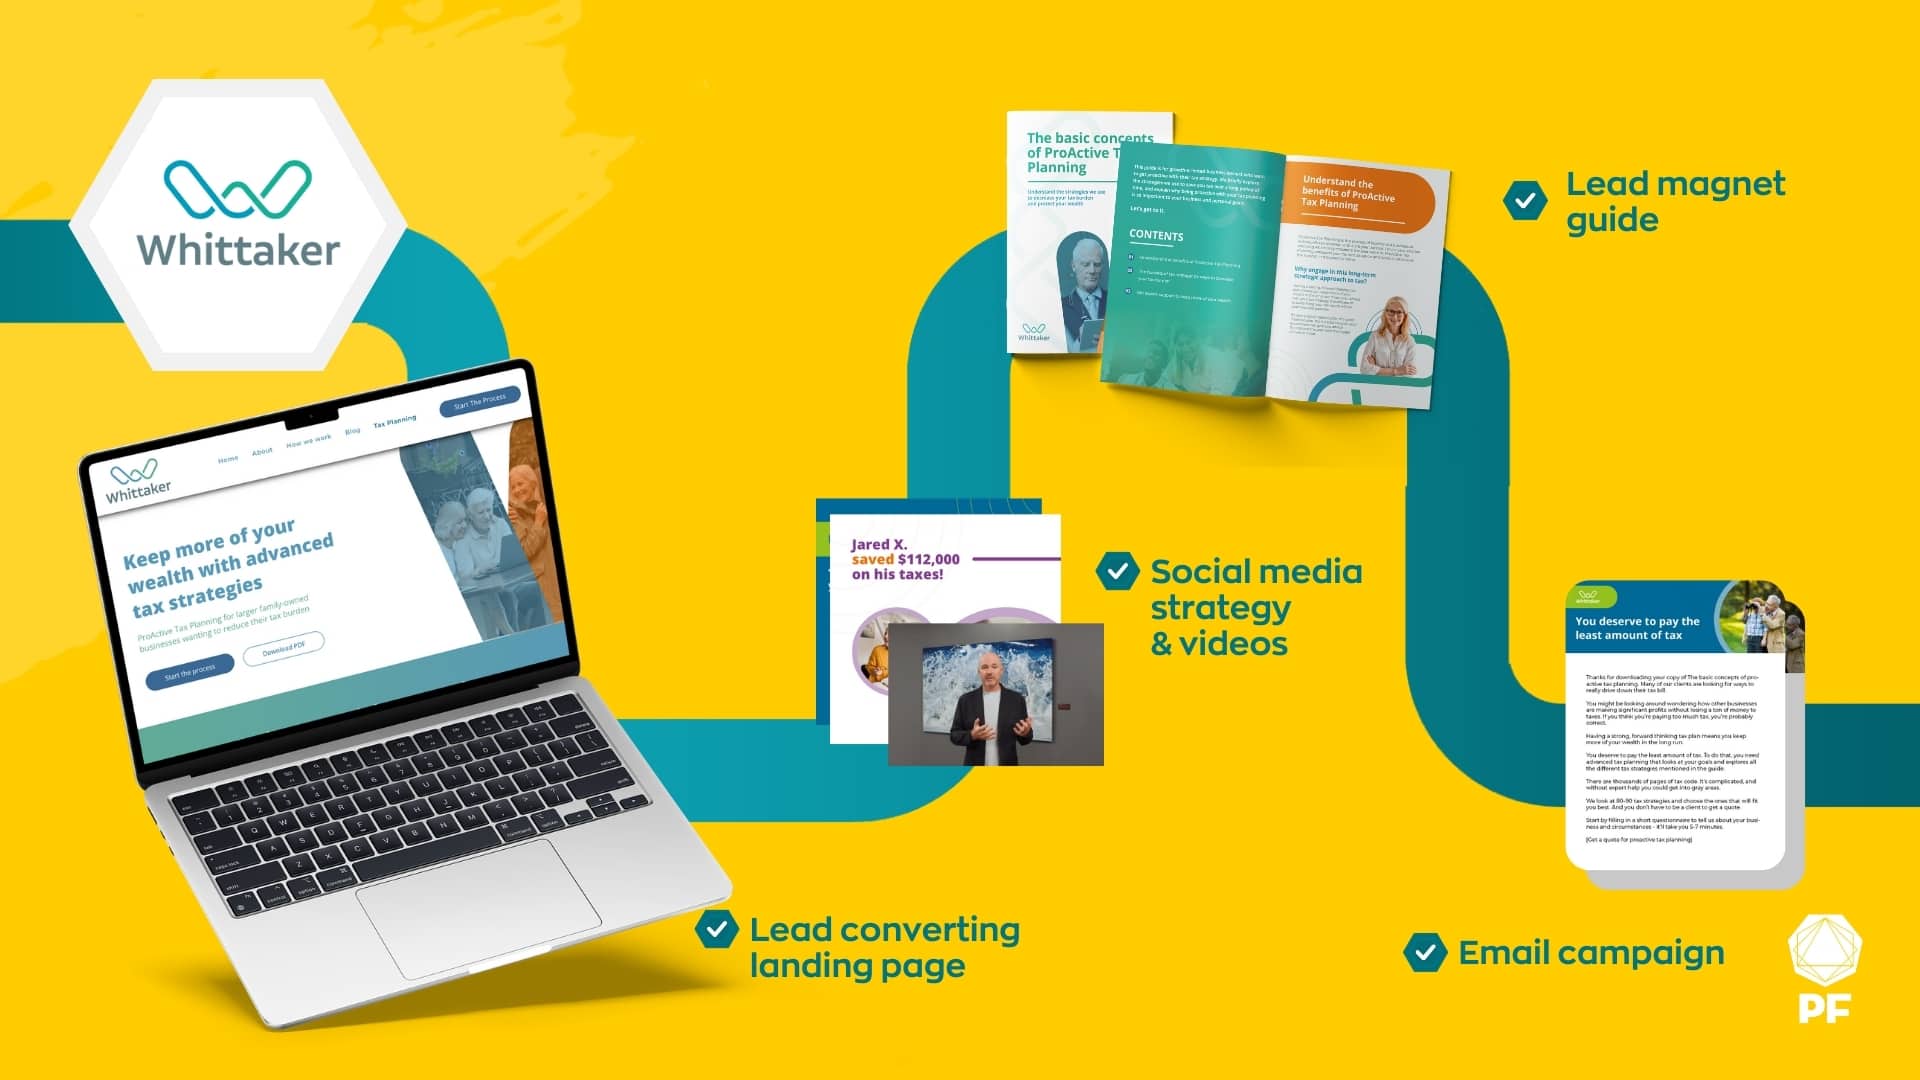 Marketing Campaign Assets for an Accounting and Tax Planning Service